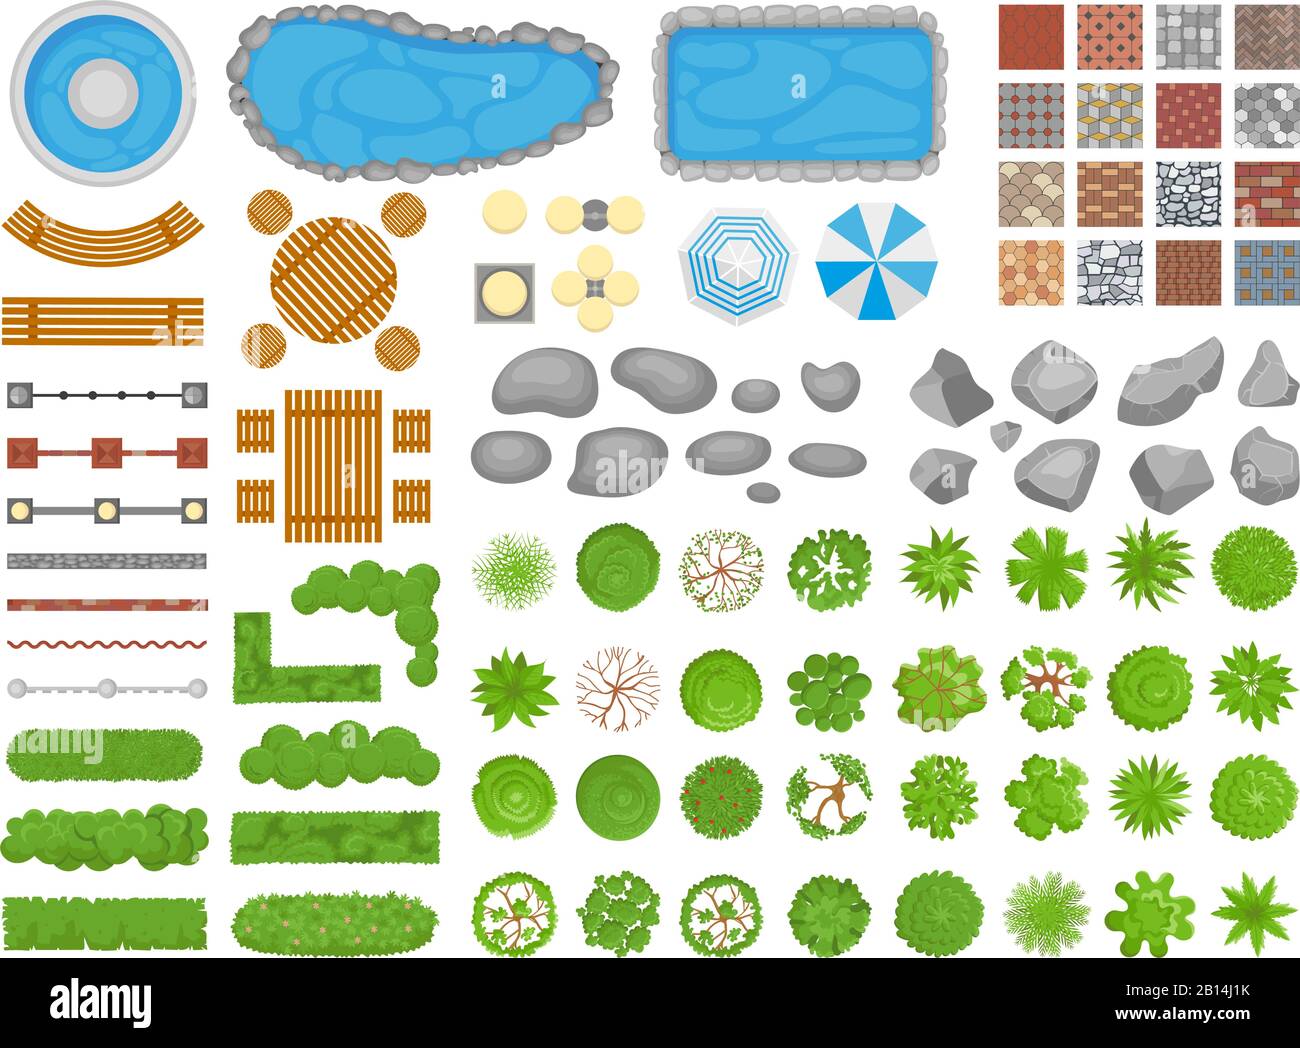 Top view park items. Garden walkway, outdoor relaxing parks furniture and gardens trees aerial isolated vector illustration set Stock Vector